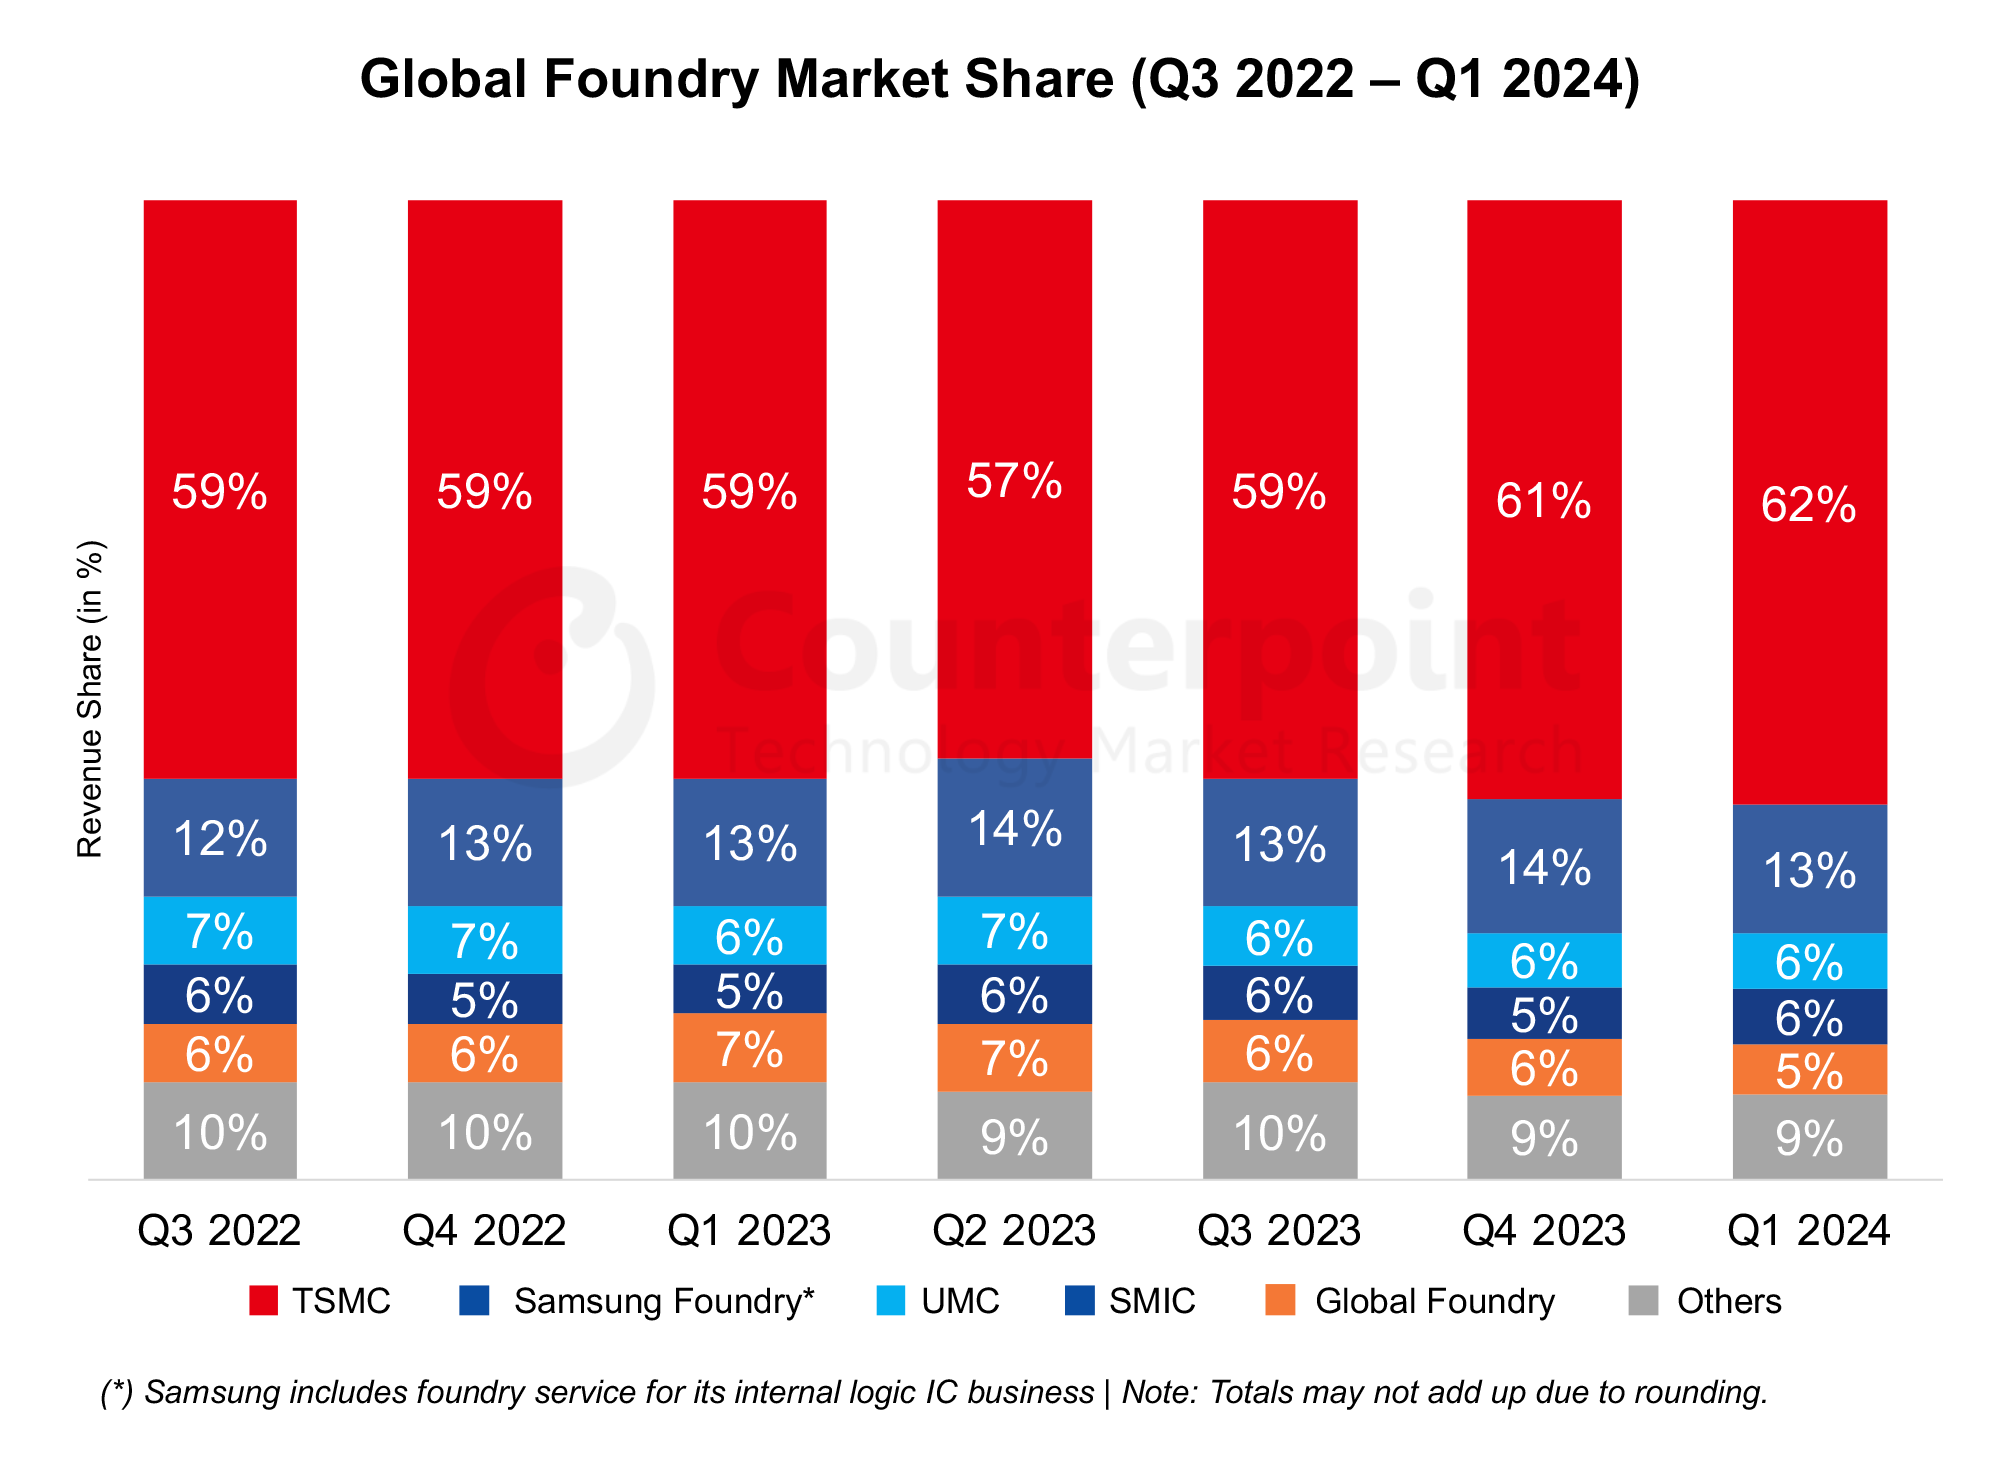 Global Foundry Market Share Q1 2024